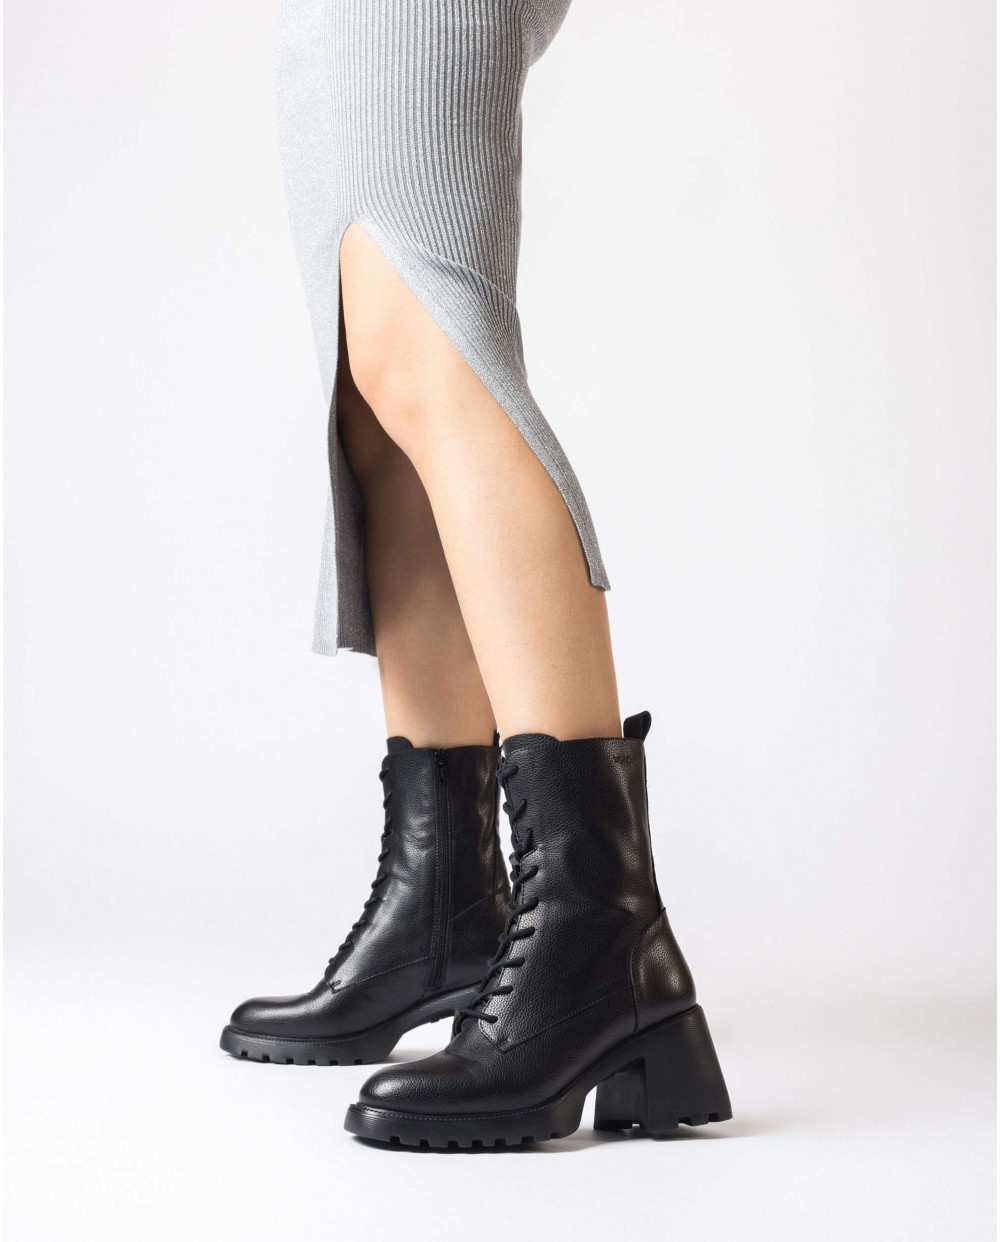 Wonders-Ankle Boots-Black GIGI ankle boot